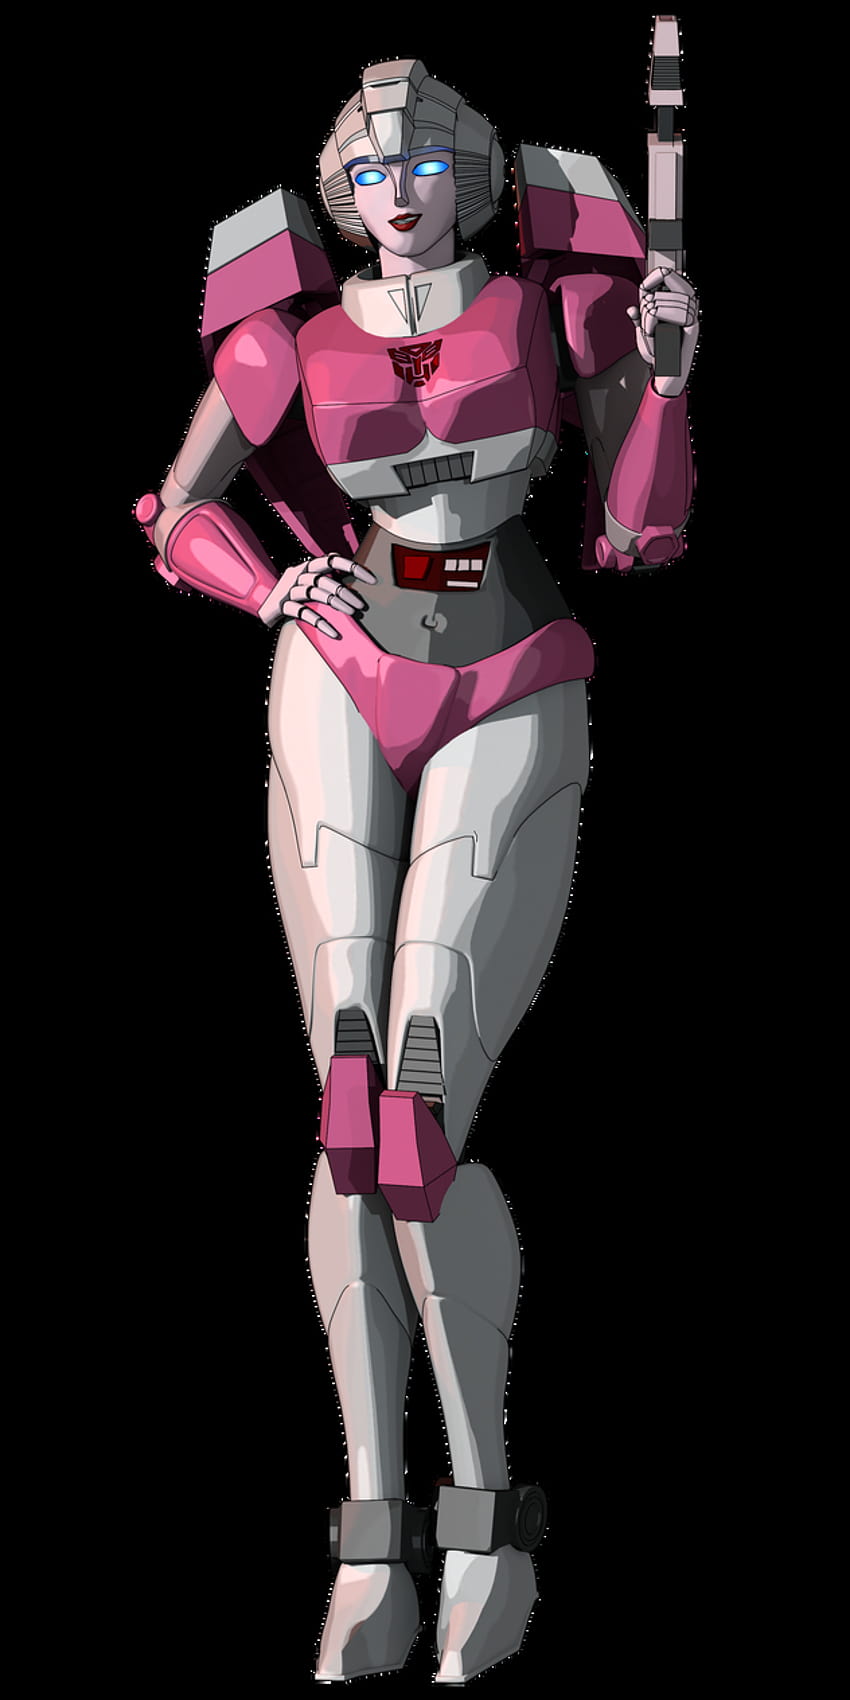 1366x768px 720p Free Download Transformers G1 Arcee 3d Model By Andypurro By Andypurro